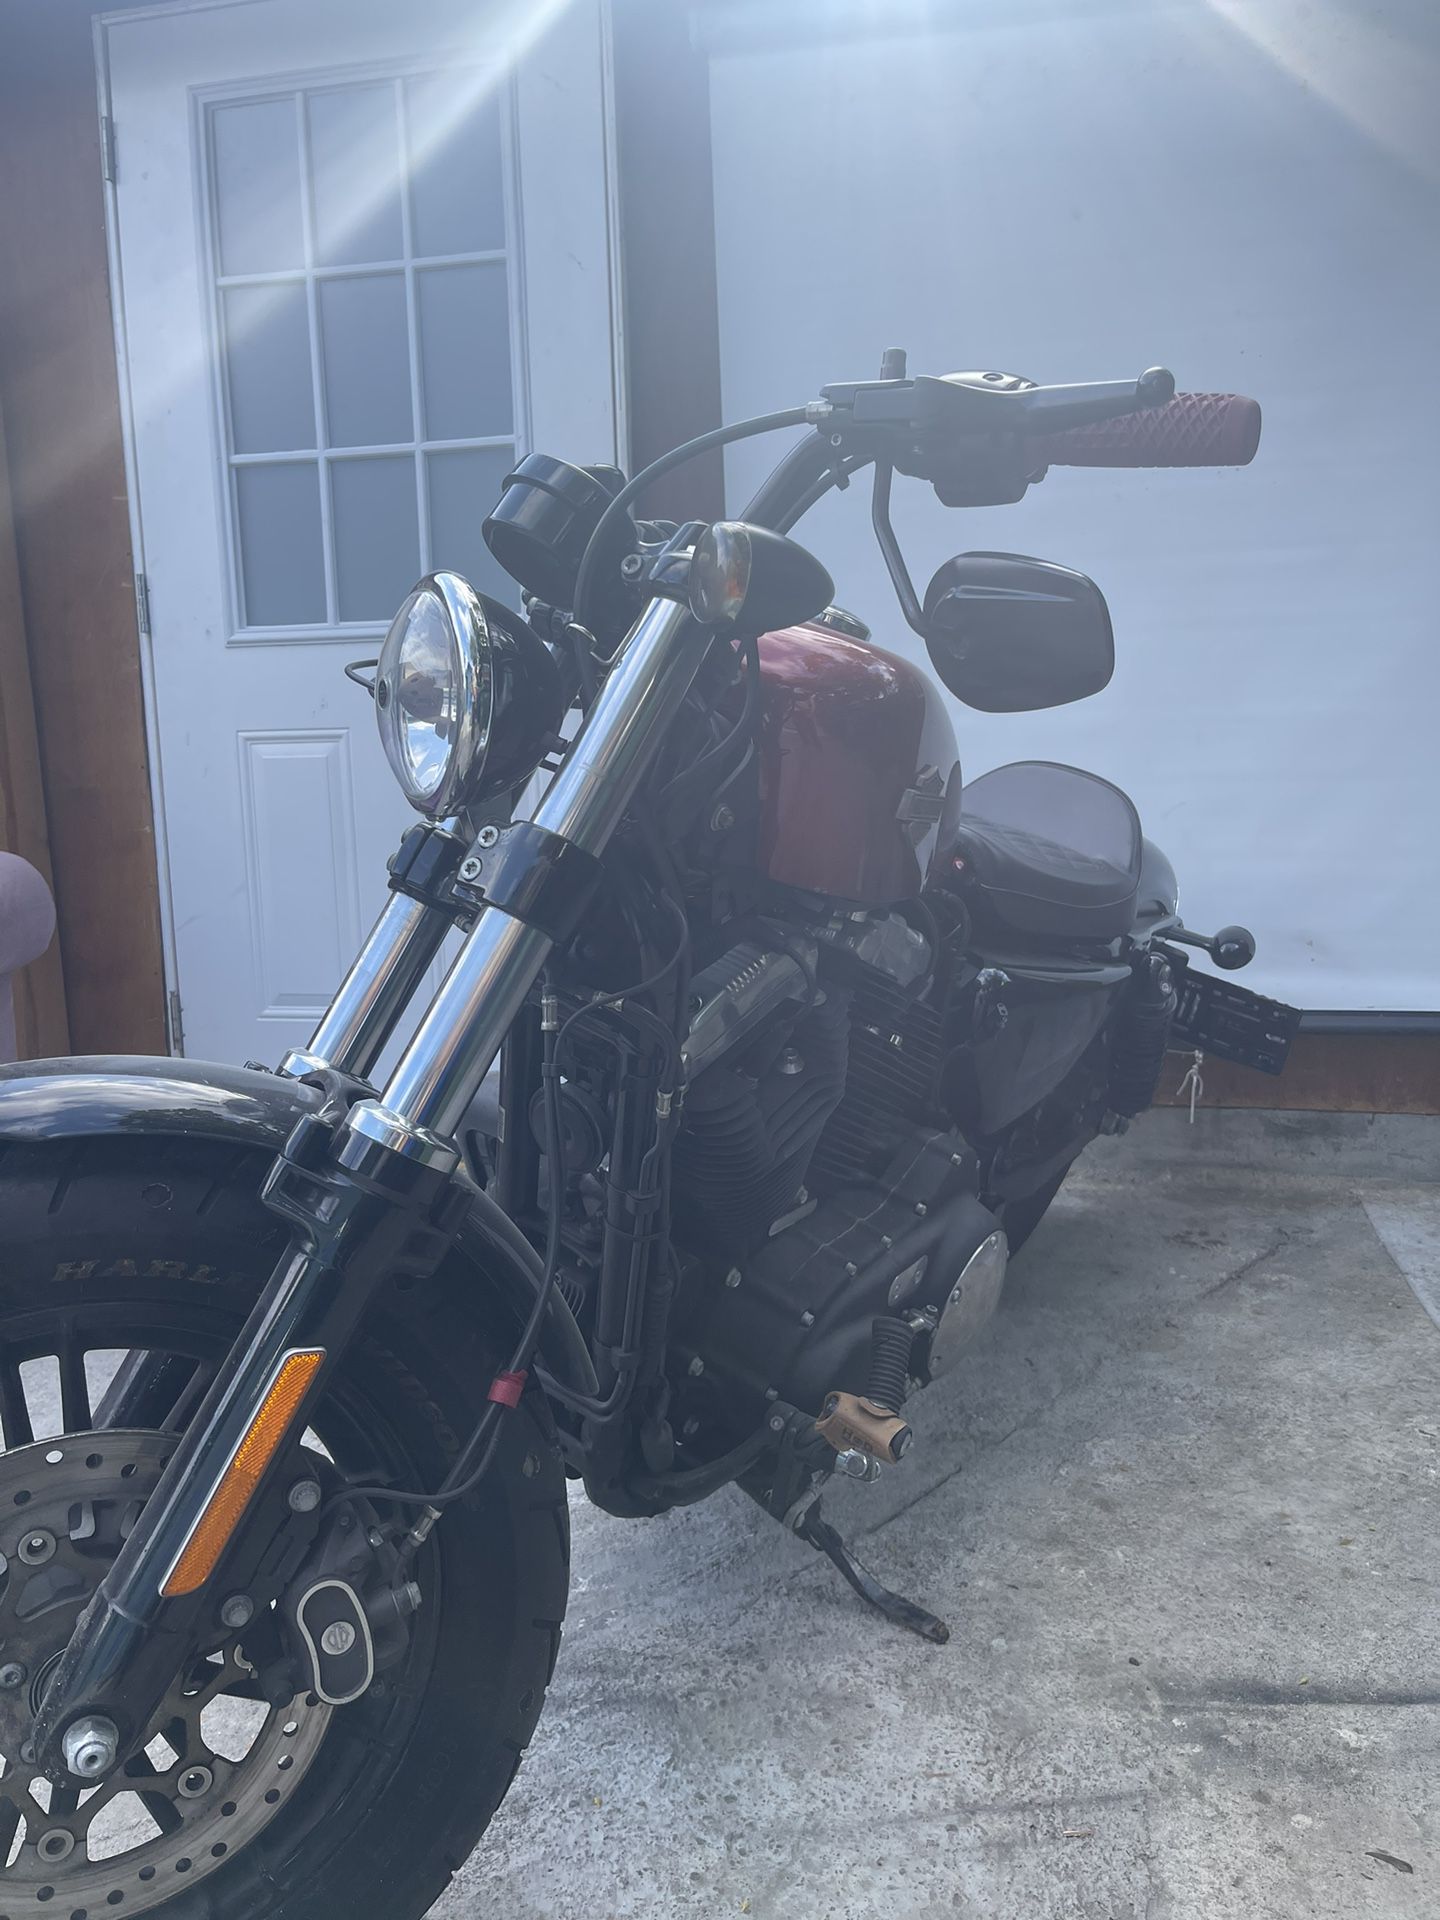 2016 Hd 48 Sportster 1200cc Low Miles 